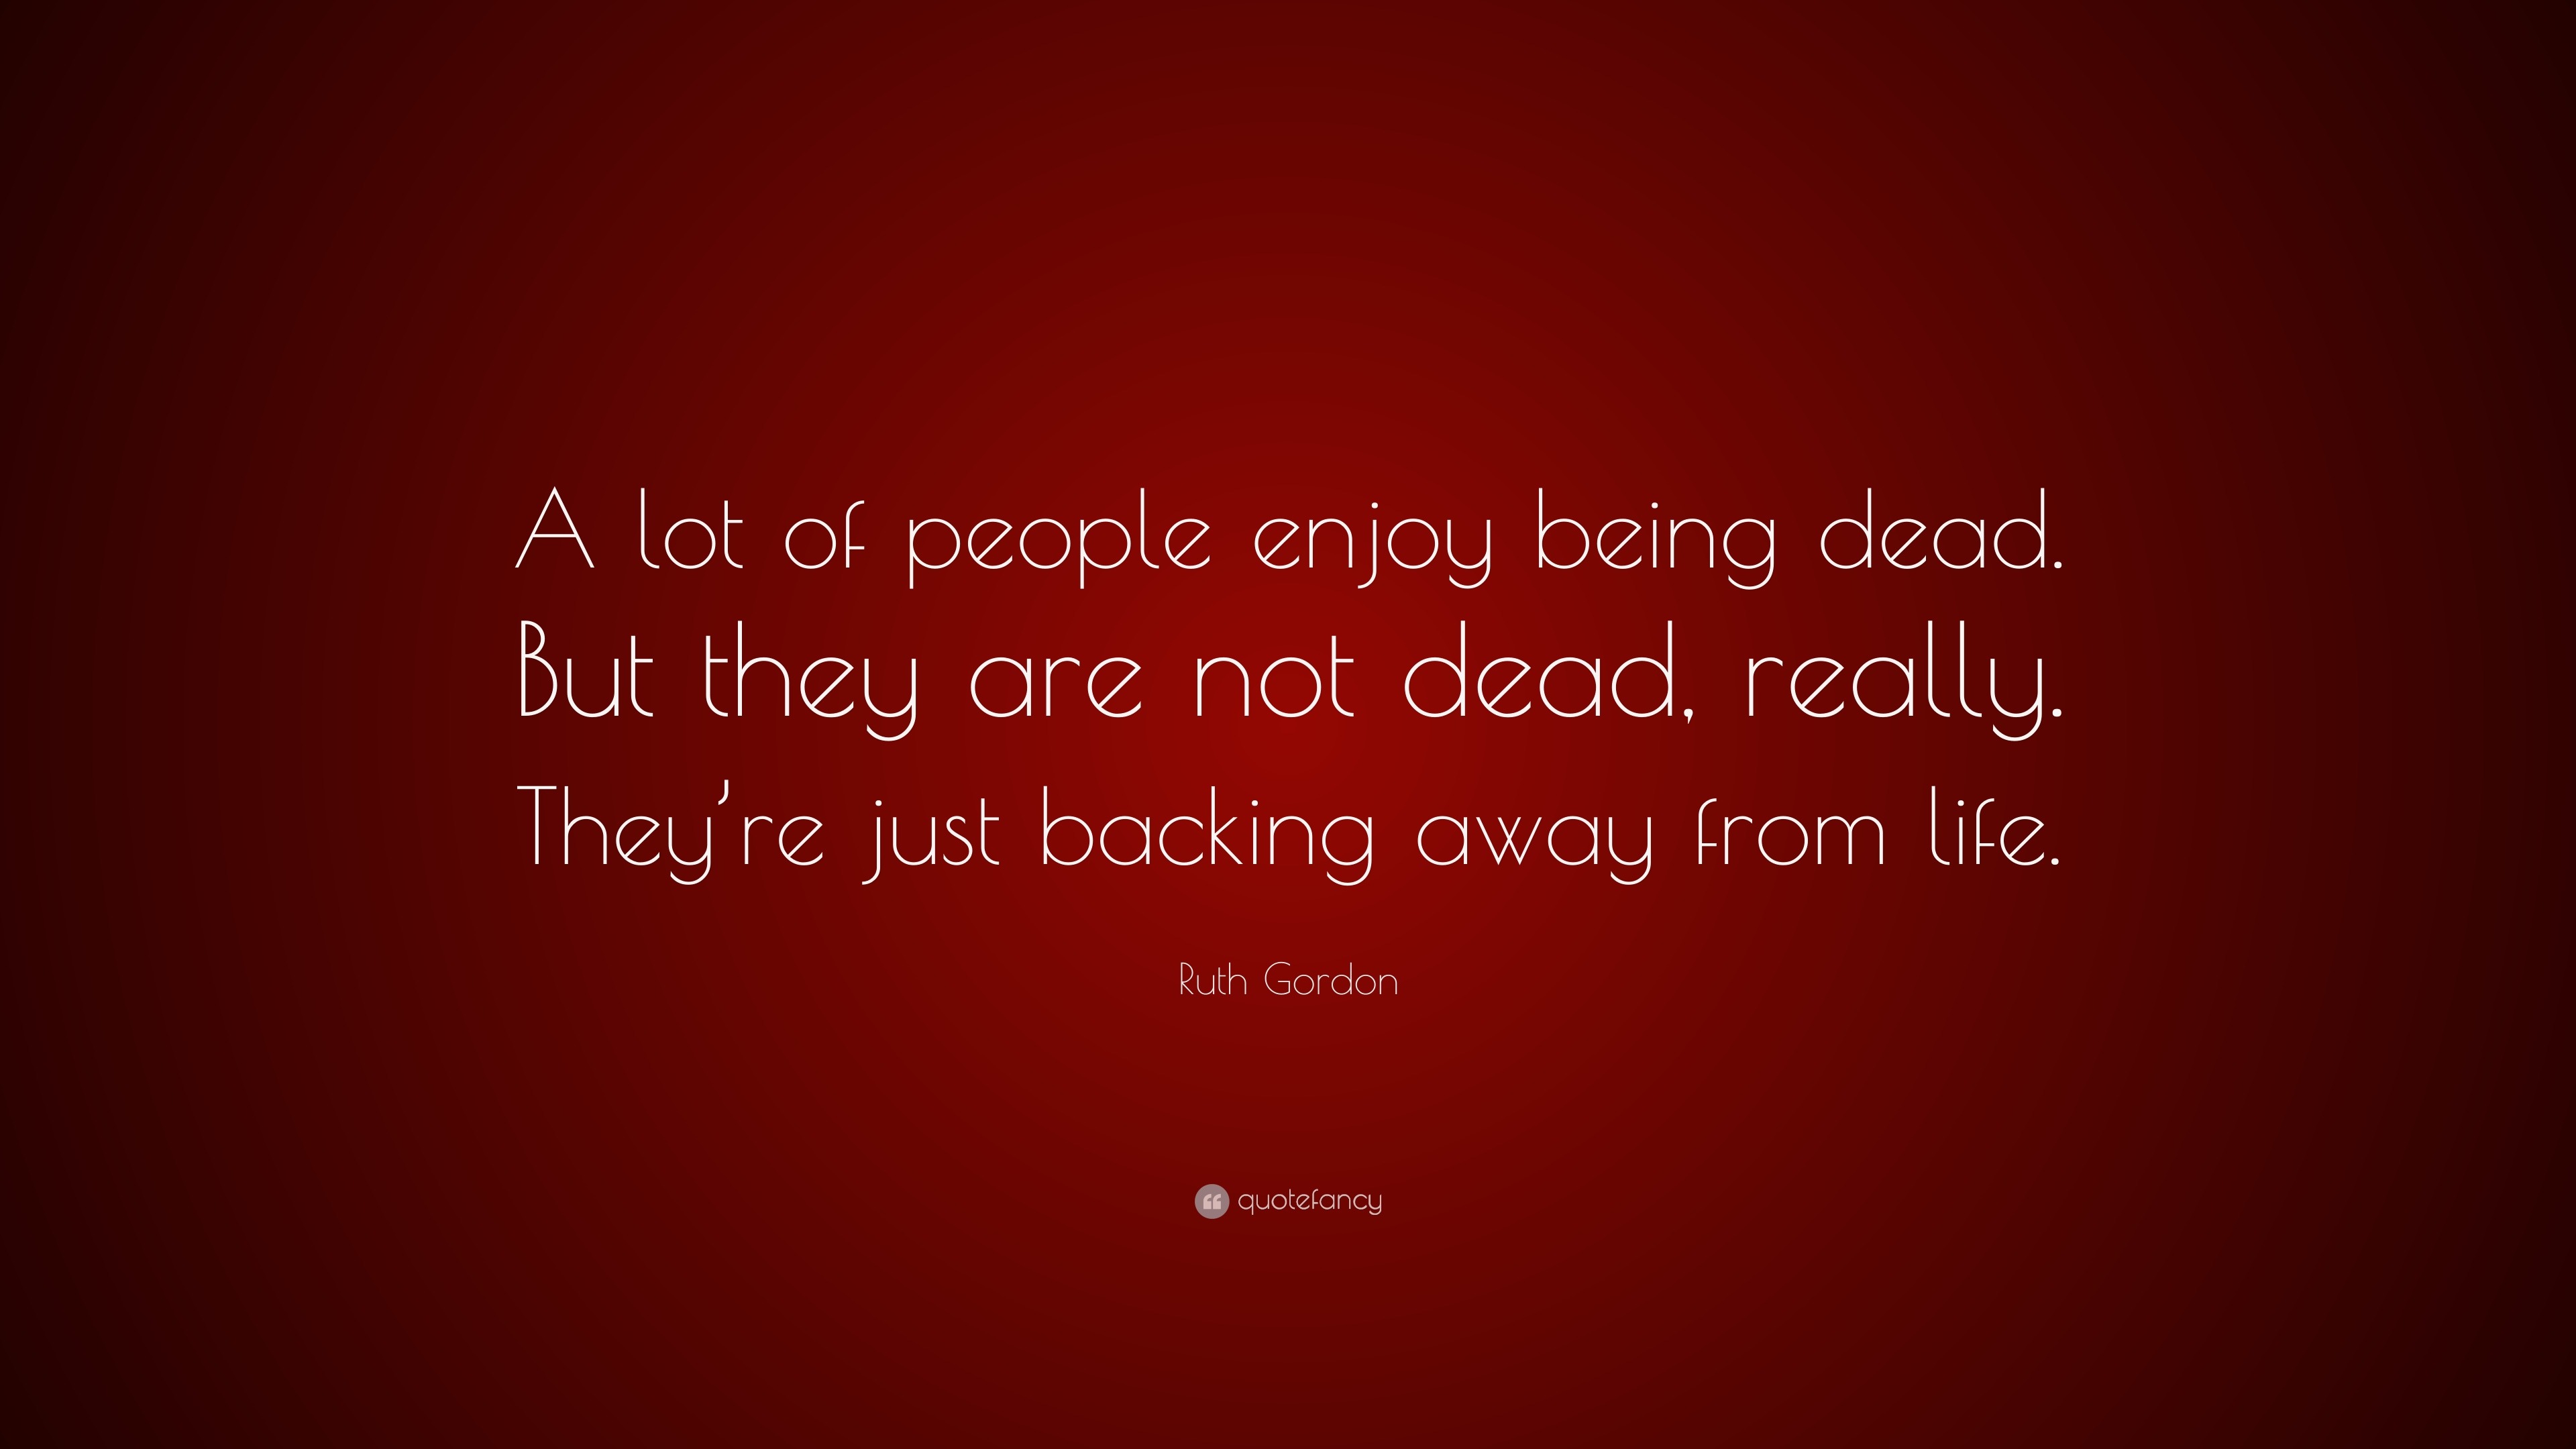 Ruth Gordon Quote: “A lot of people enjoy being dead. But they are not ...